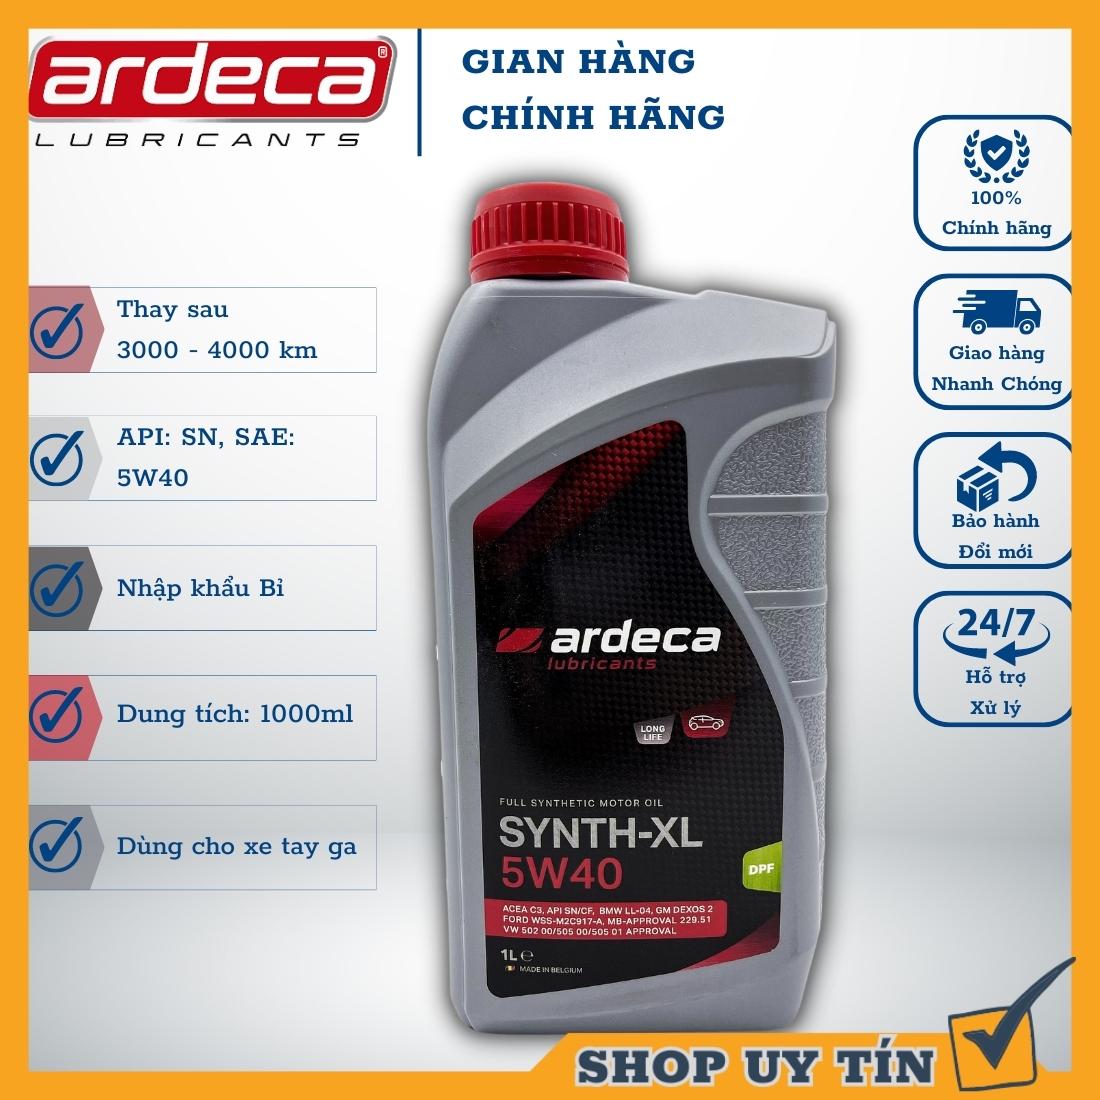 Aref synth-xl 5w40 original Mercerizing general use Belgium scooter oil